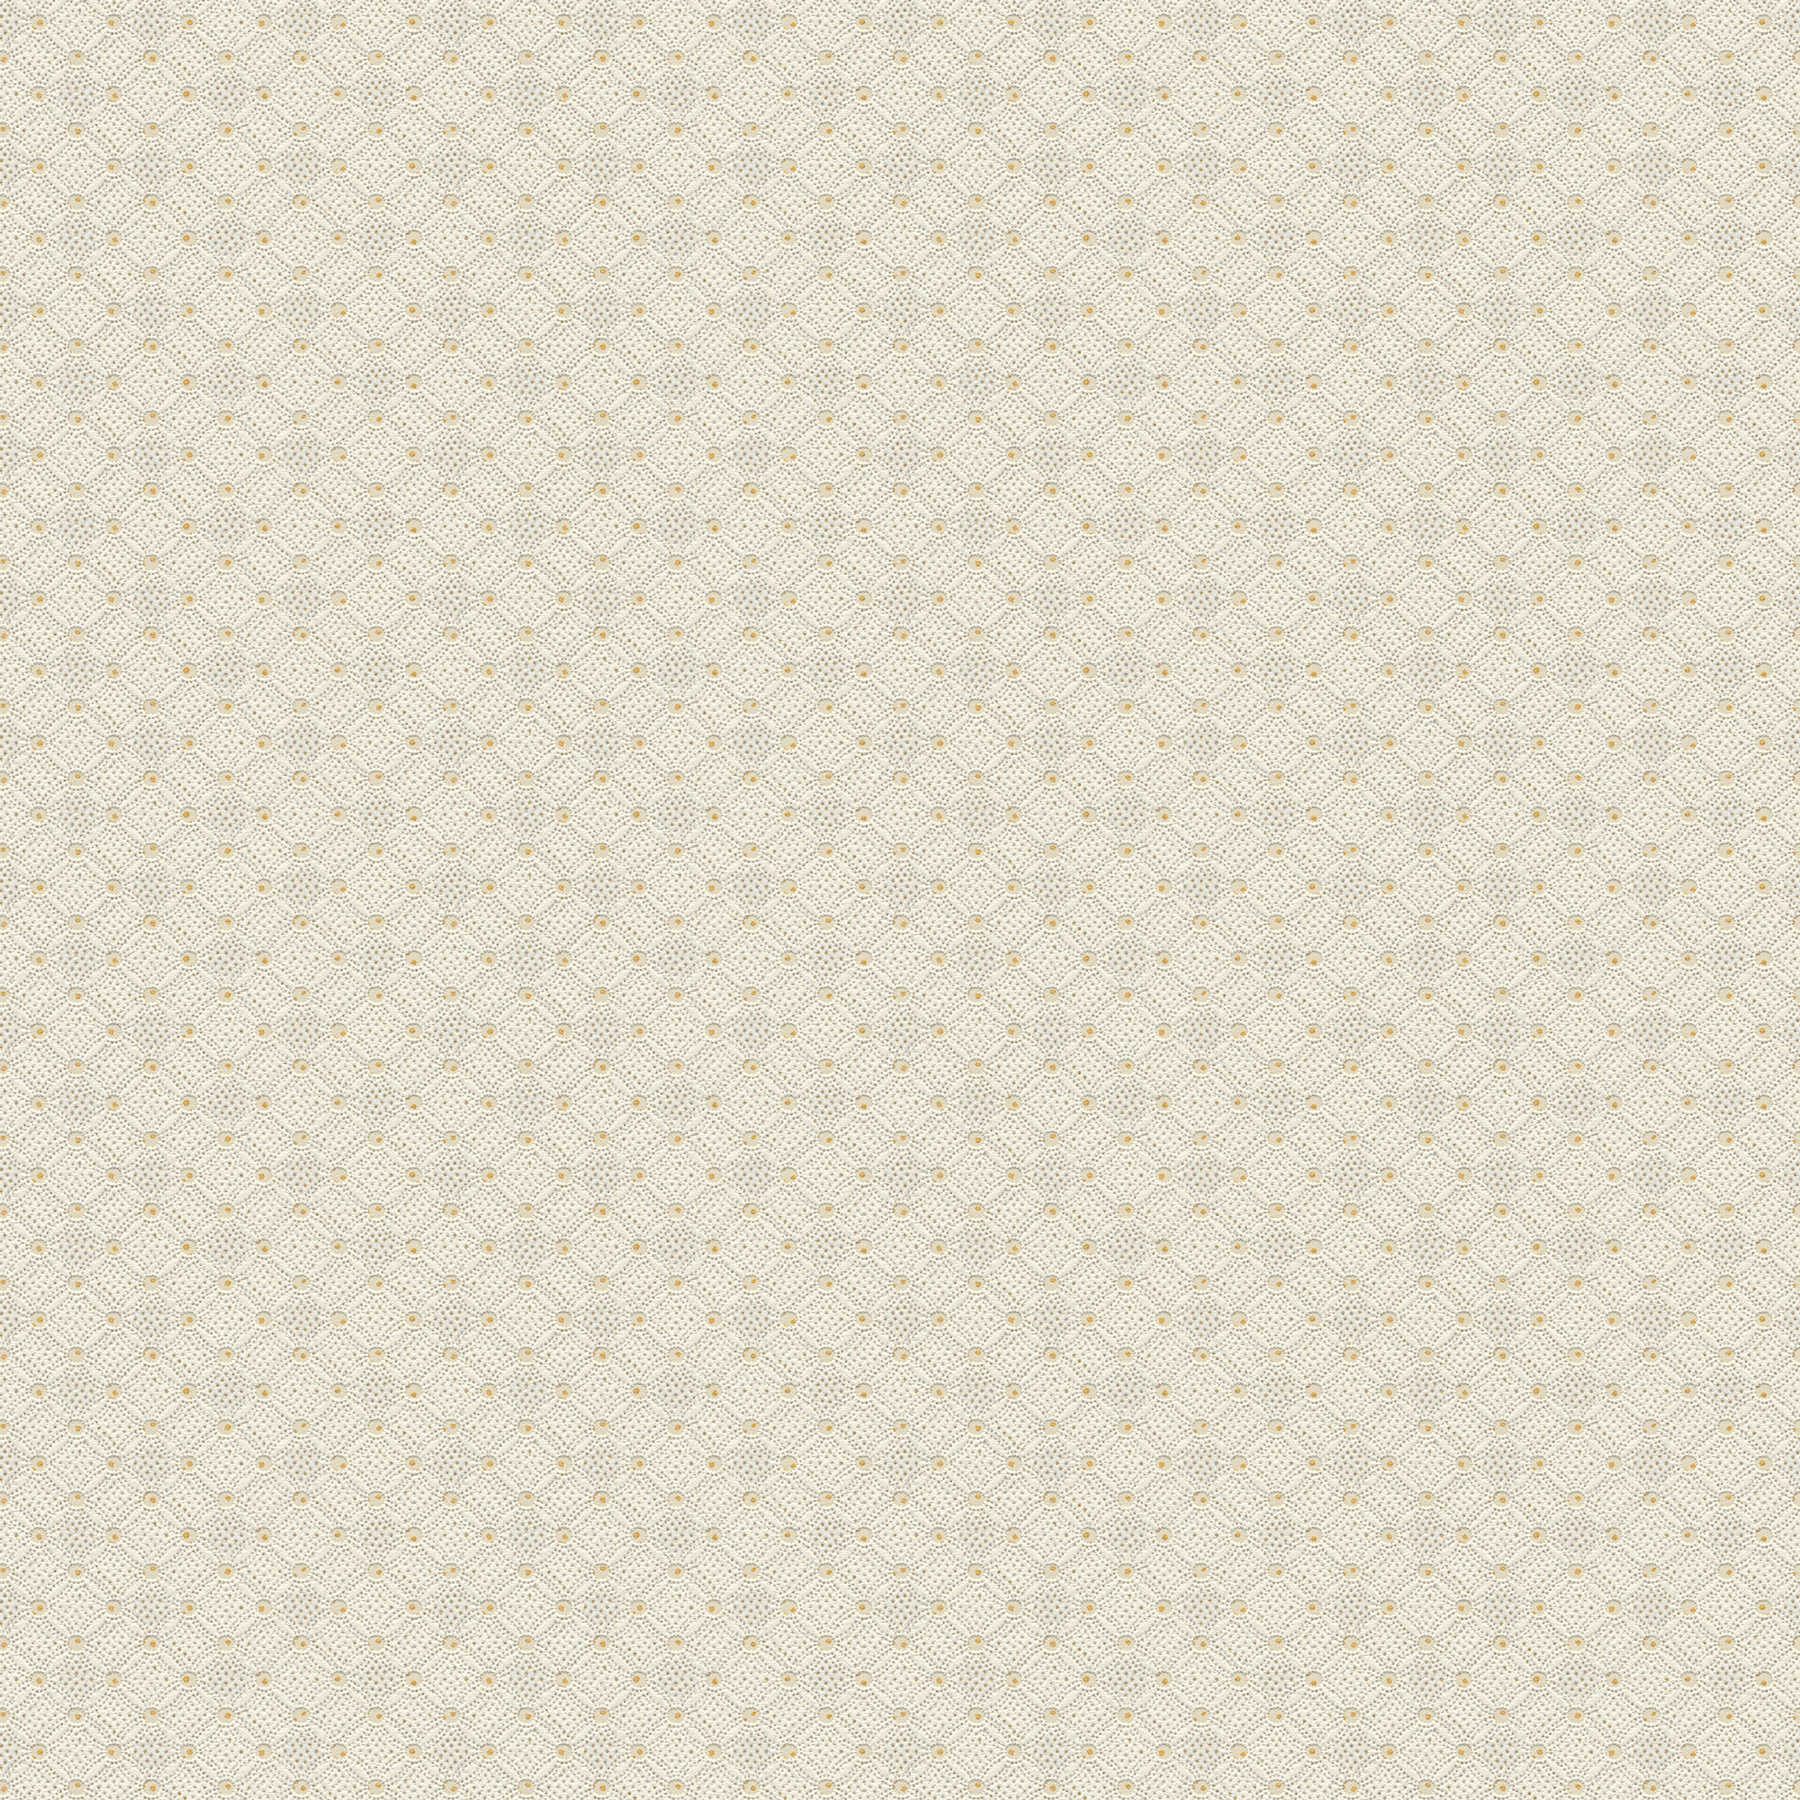 Structured wallpaper with diamond and dots pattern - beige, yellow, cream
